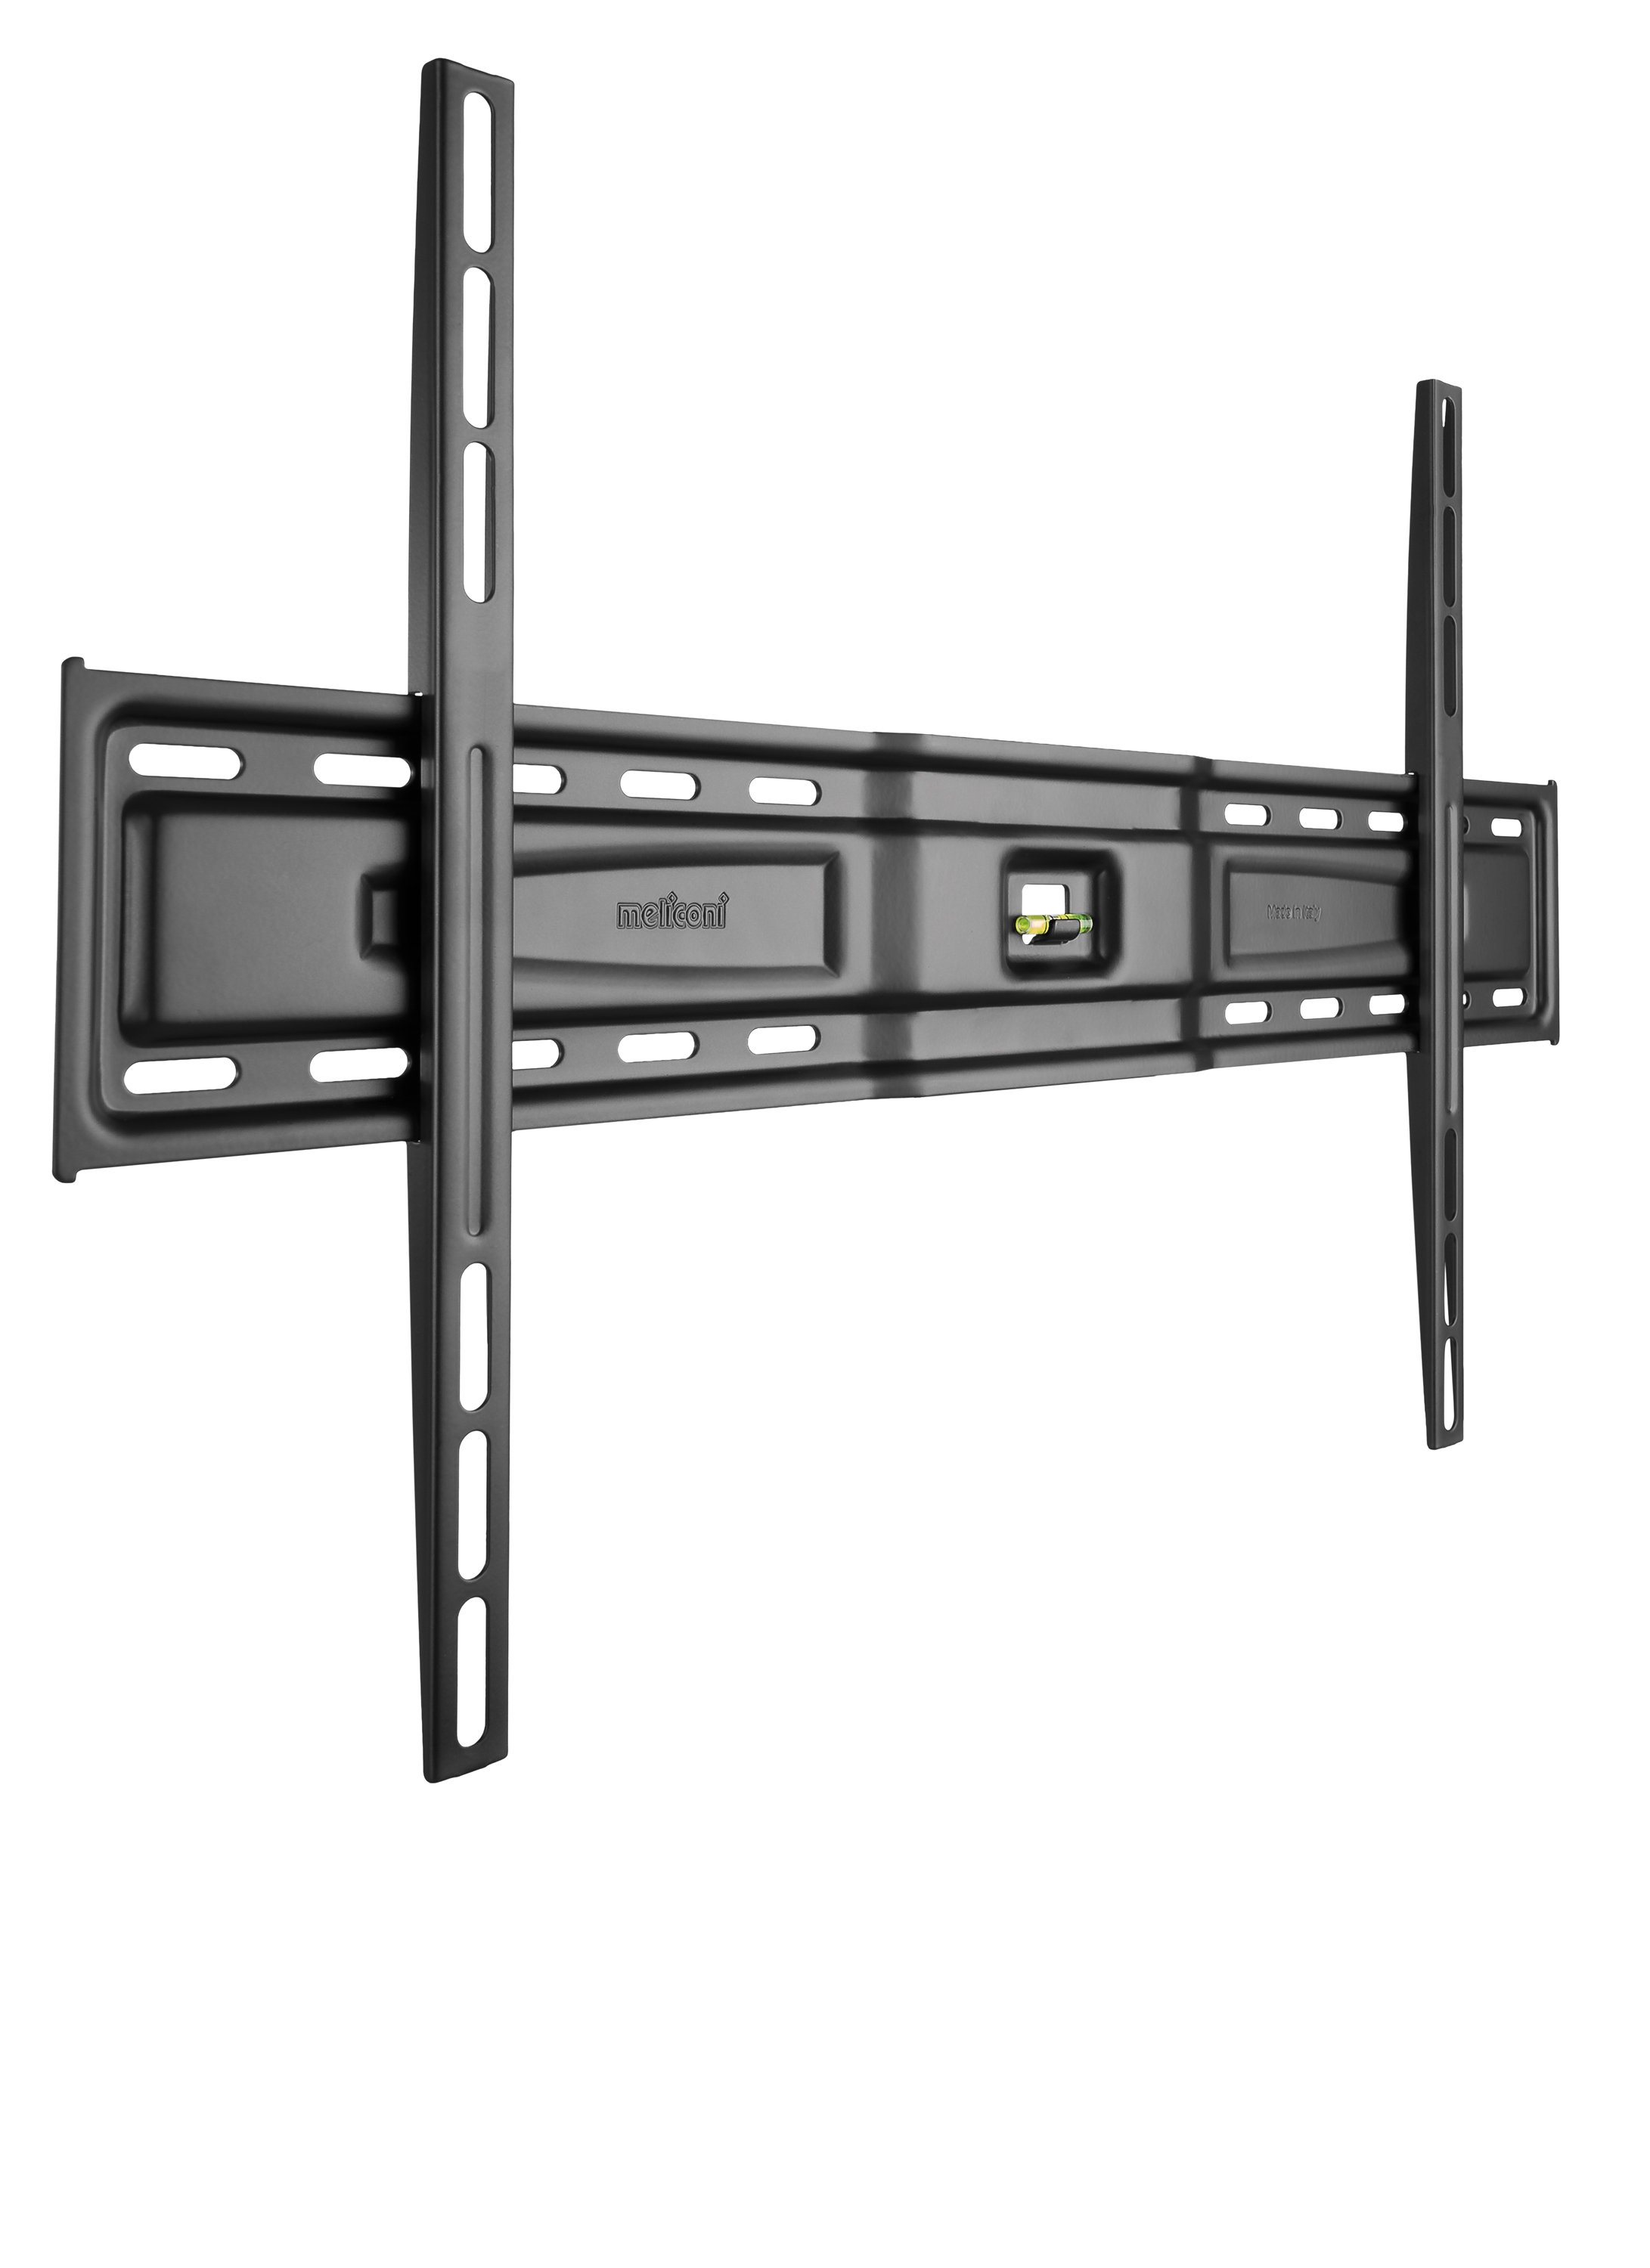 Slimstyle 600S, support mural ultra thin pour 50-80 inch tv, noir